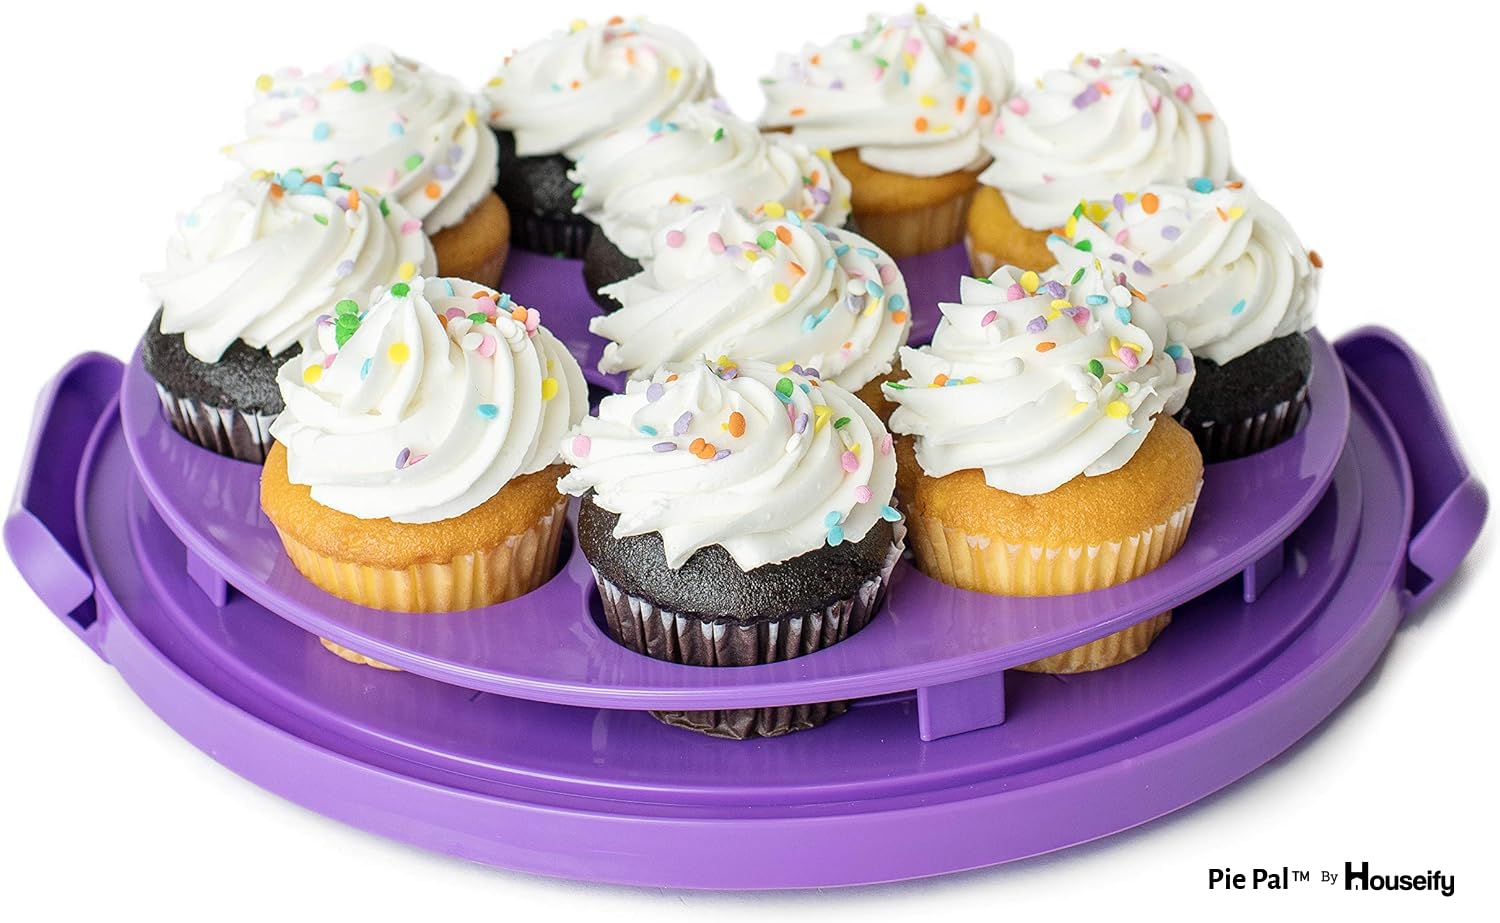 Houseify Purple PIE PAL, Pie & Cake Carrier w/Flat Handle & Domed Lid for Tall Pies & Cakes, Cupcake Storage, Plus Veggie/Fruit/Nut Tray, Fits 9 In. Cakes & Pies